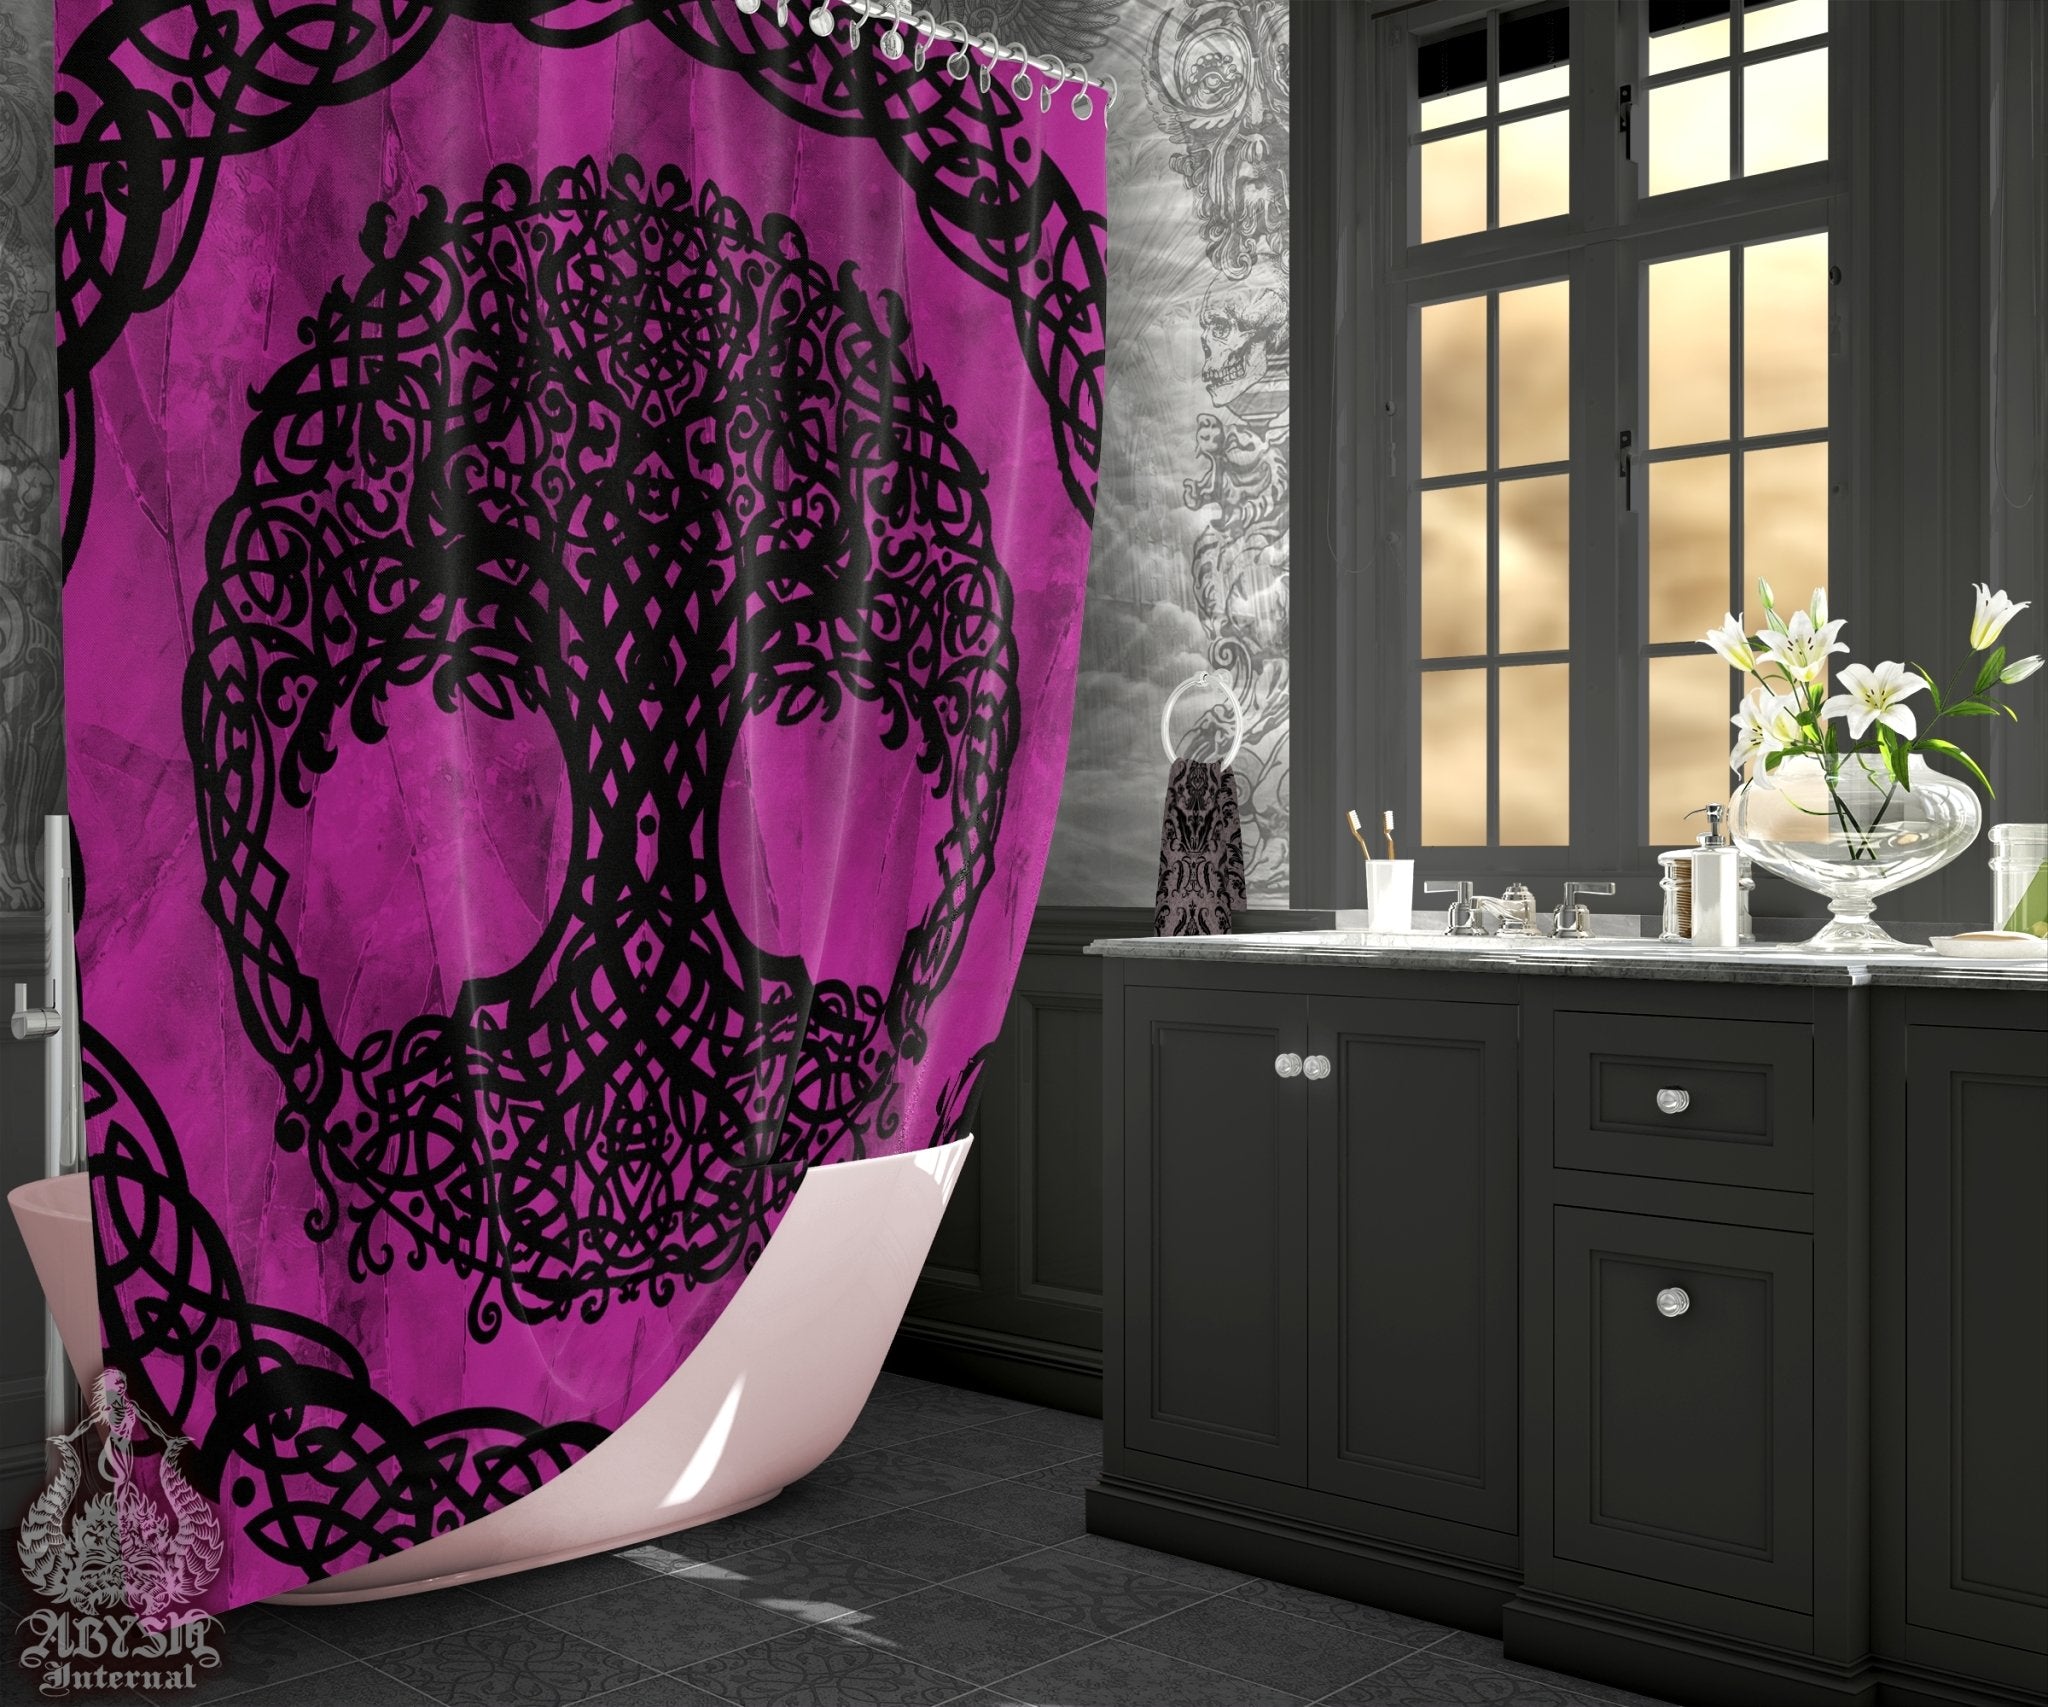 Witchy Shower Curtain, Tree of Life, Wiccan Bathroom Decor, Pagan, Celtic Knot, Indie and Wicca Witch Home - Pink Black - Abysm Internal